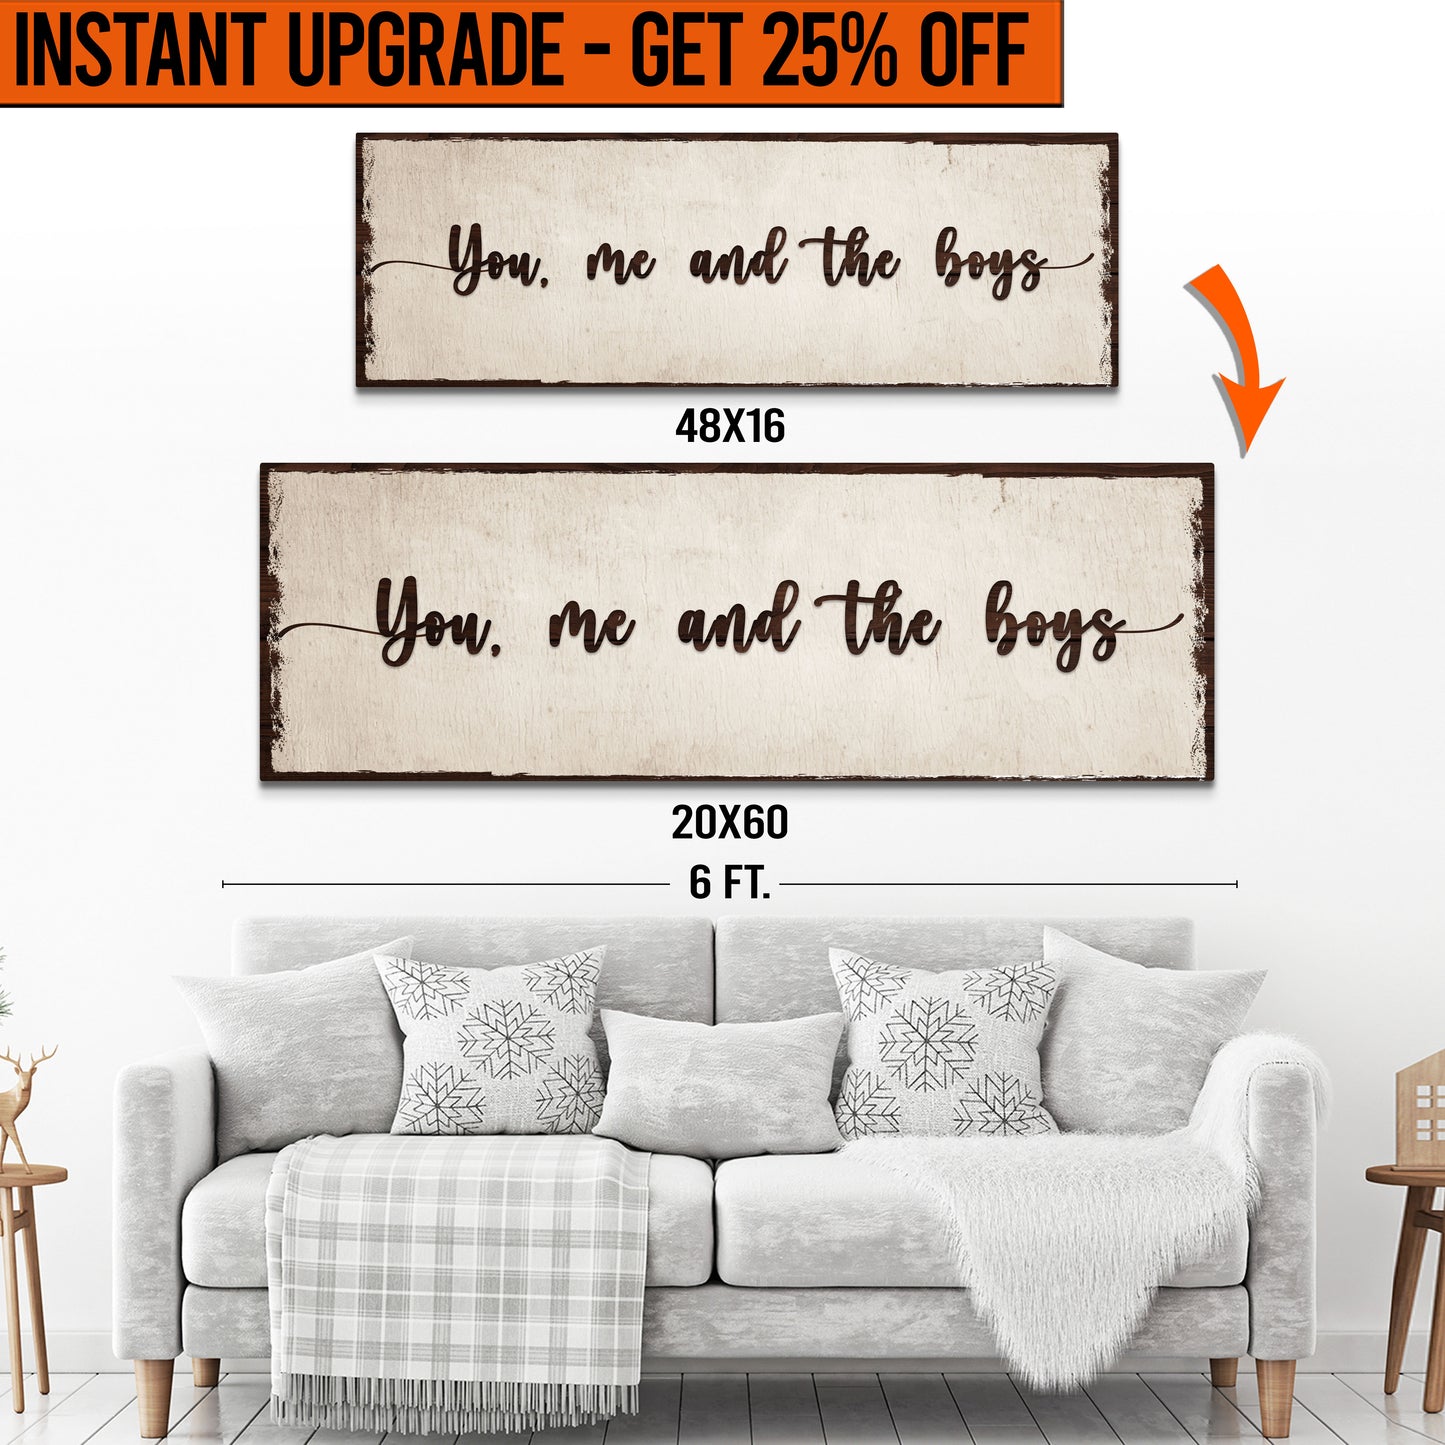 Upgrade Your 16x48 Inches 'You Me and the Boys' (Style 2) Canvas To 20x60 Inches